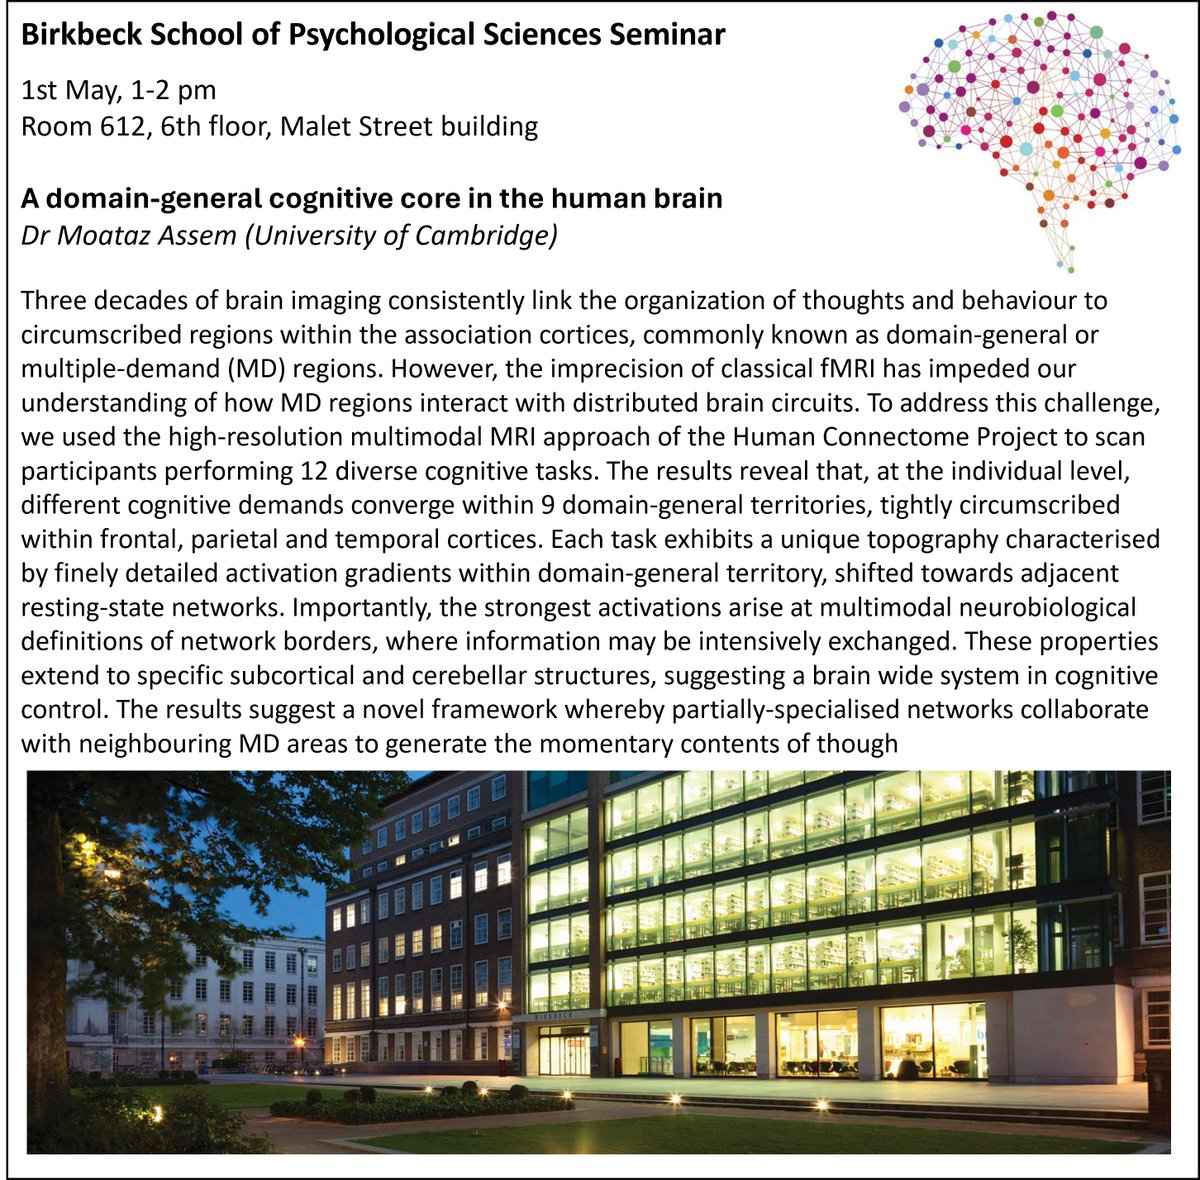 Incredibly excited to announce that the next Birkbeck School of Psychological Sciences Seminar will host Dr Moataz Assem, from University of Cambridge! Don't miss it! Wednesday, May 1st, 1-2pm, Room 612 Teams link available at s.seghezzi@bbk.ac.uk @MoatazAssem @bbkpsychology